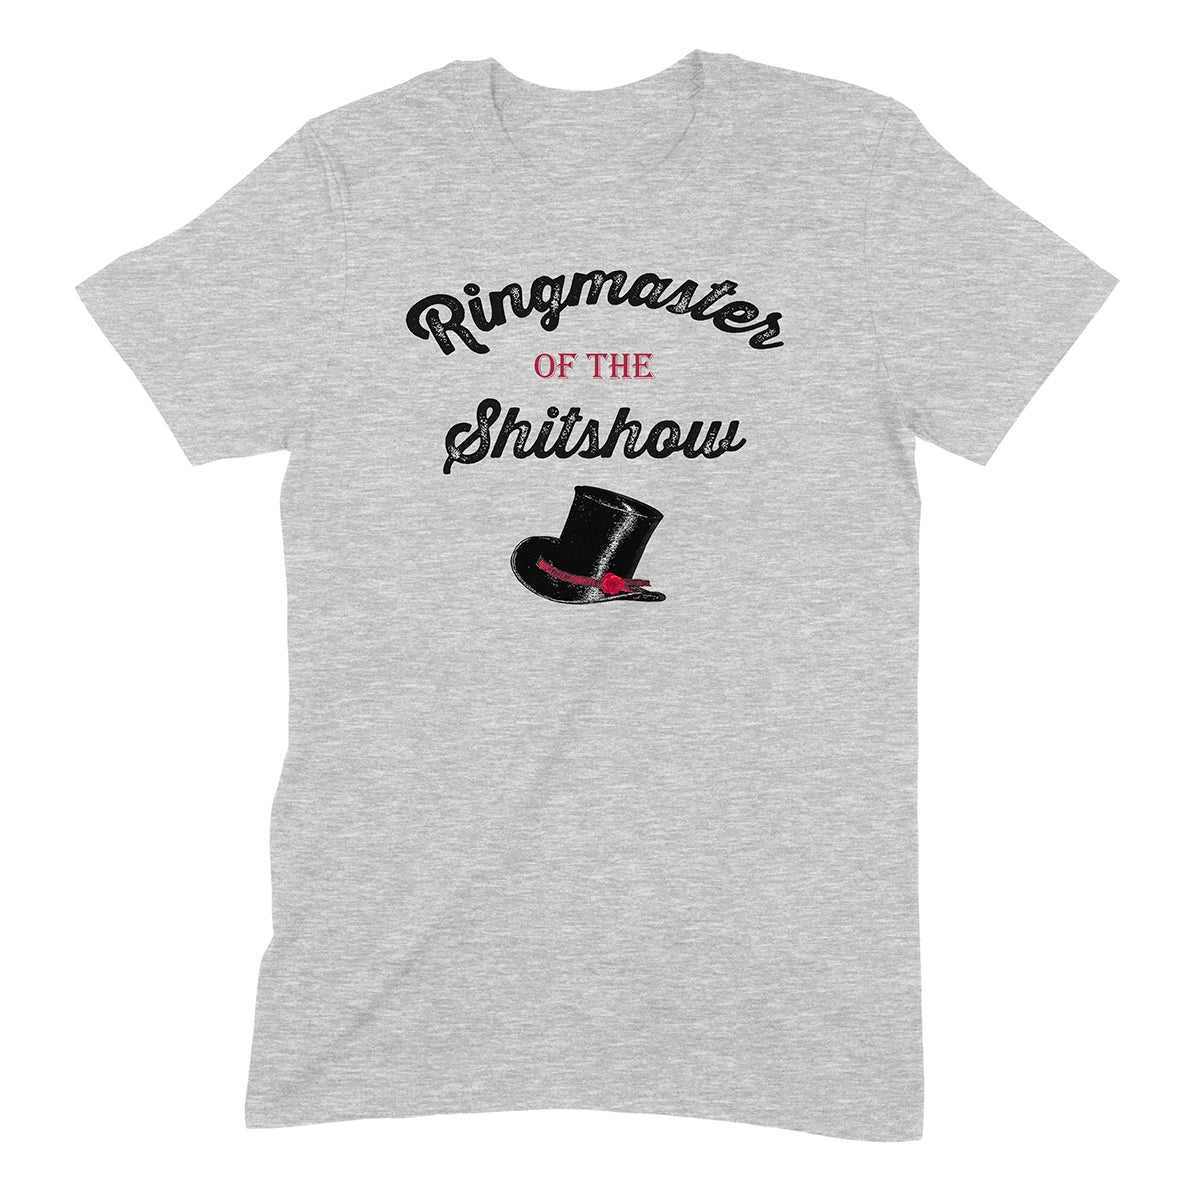 "Ringmaster Of The Show" Premium Midweight Ringspun Cotton T-Shirt - Mens/Womens Fits